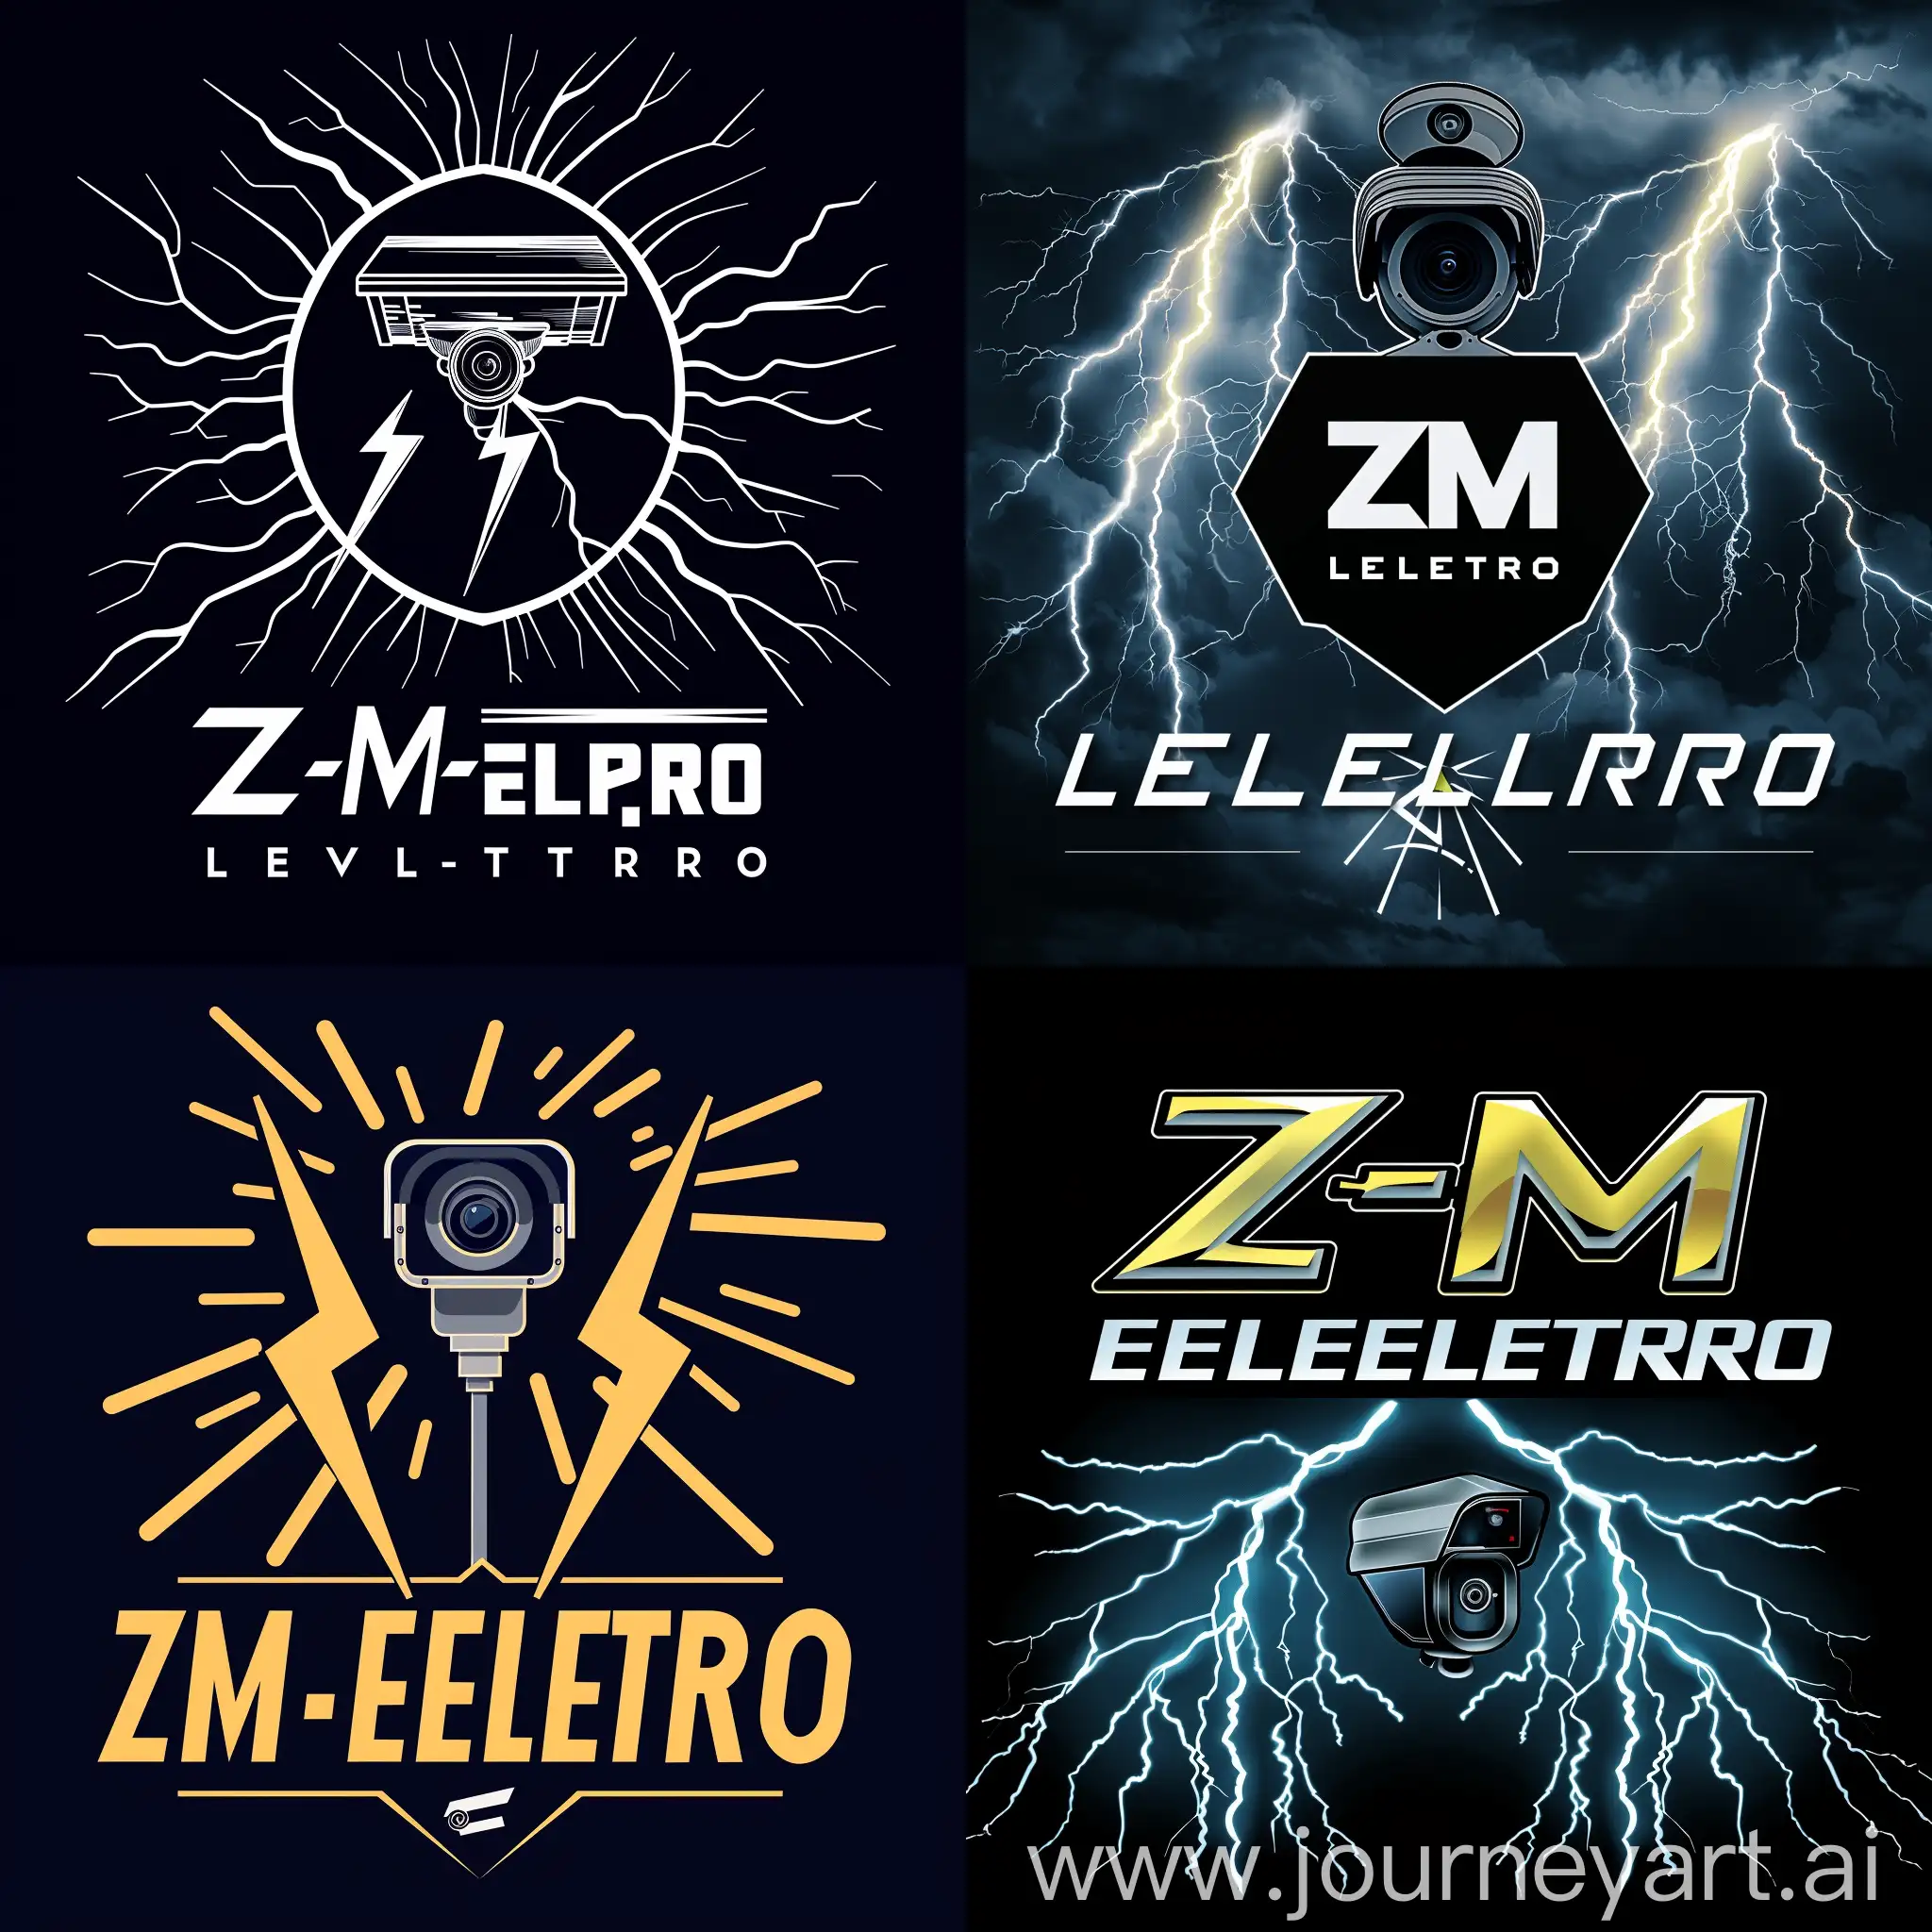 ZMelektro-Logo-with-Electric-Lightning-Bolts-and-Security-Camera